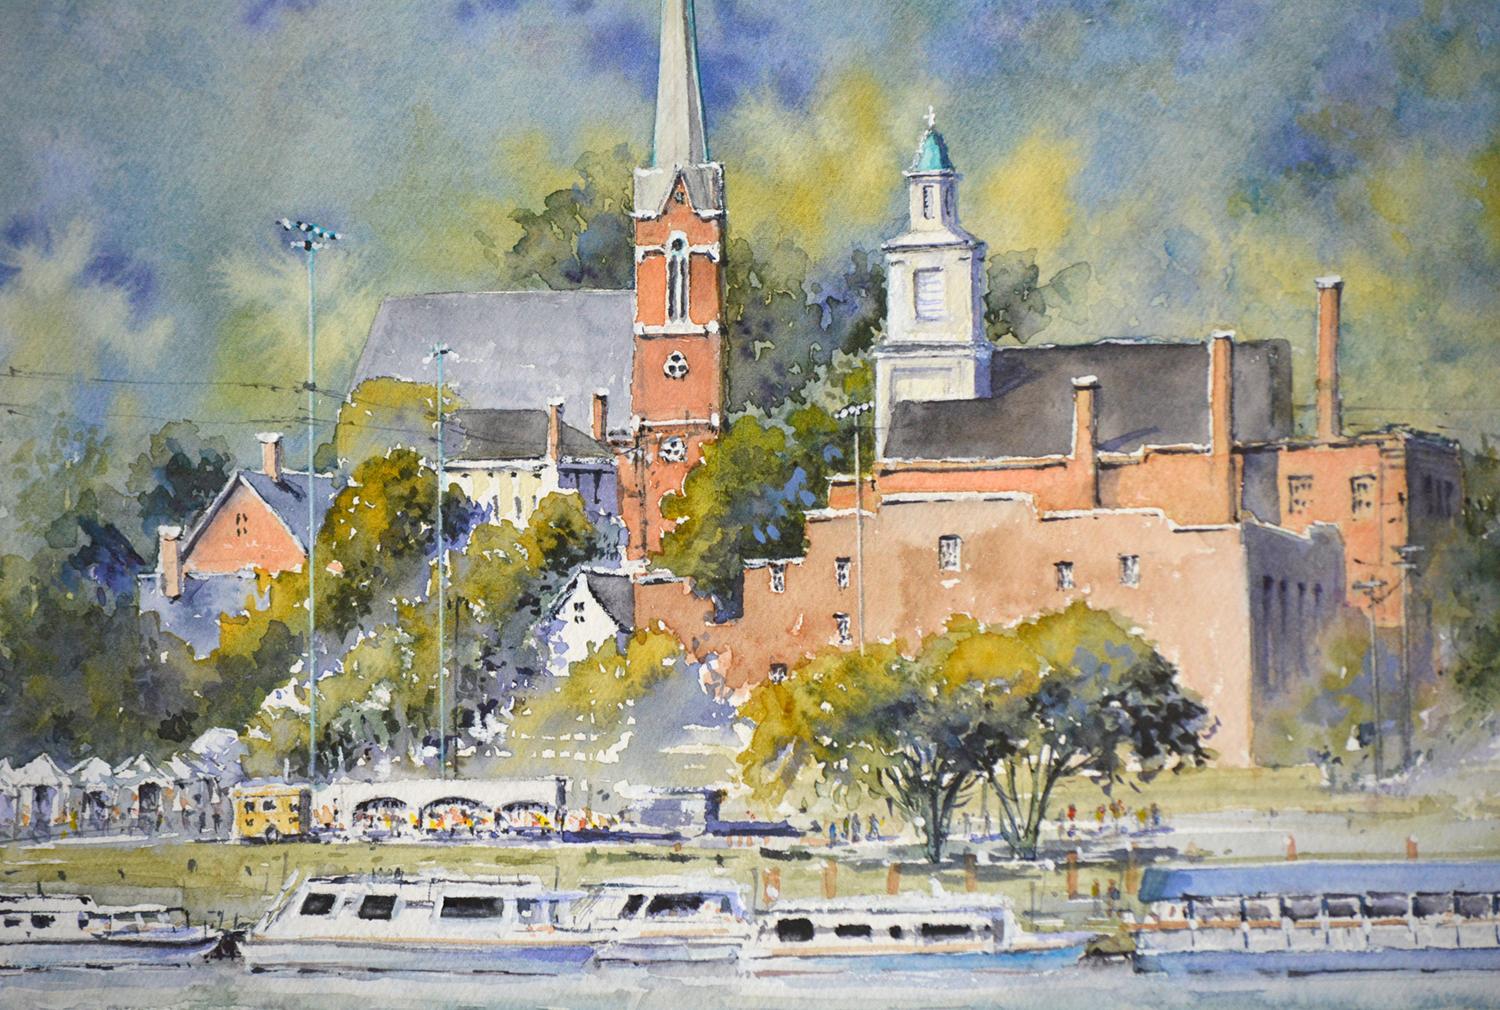 <p>Artist Comments<br>Artist Judy Mudd demonstrates a sweeping view of Madison from the Ohio River. As part of her Marine collection, she spotlights the vicinity from a unique perspective. The depth evokes the feeling as though the viewer observes